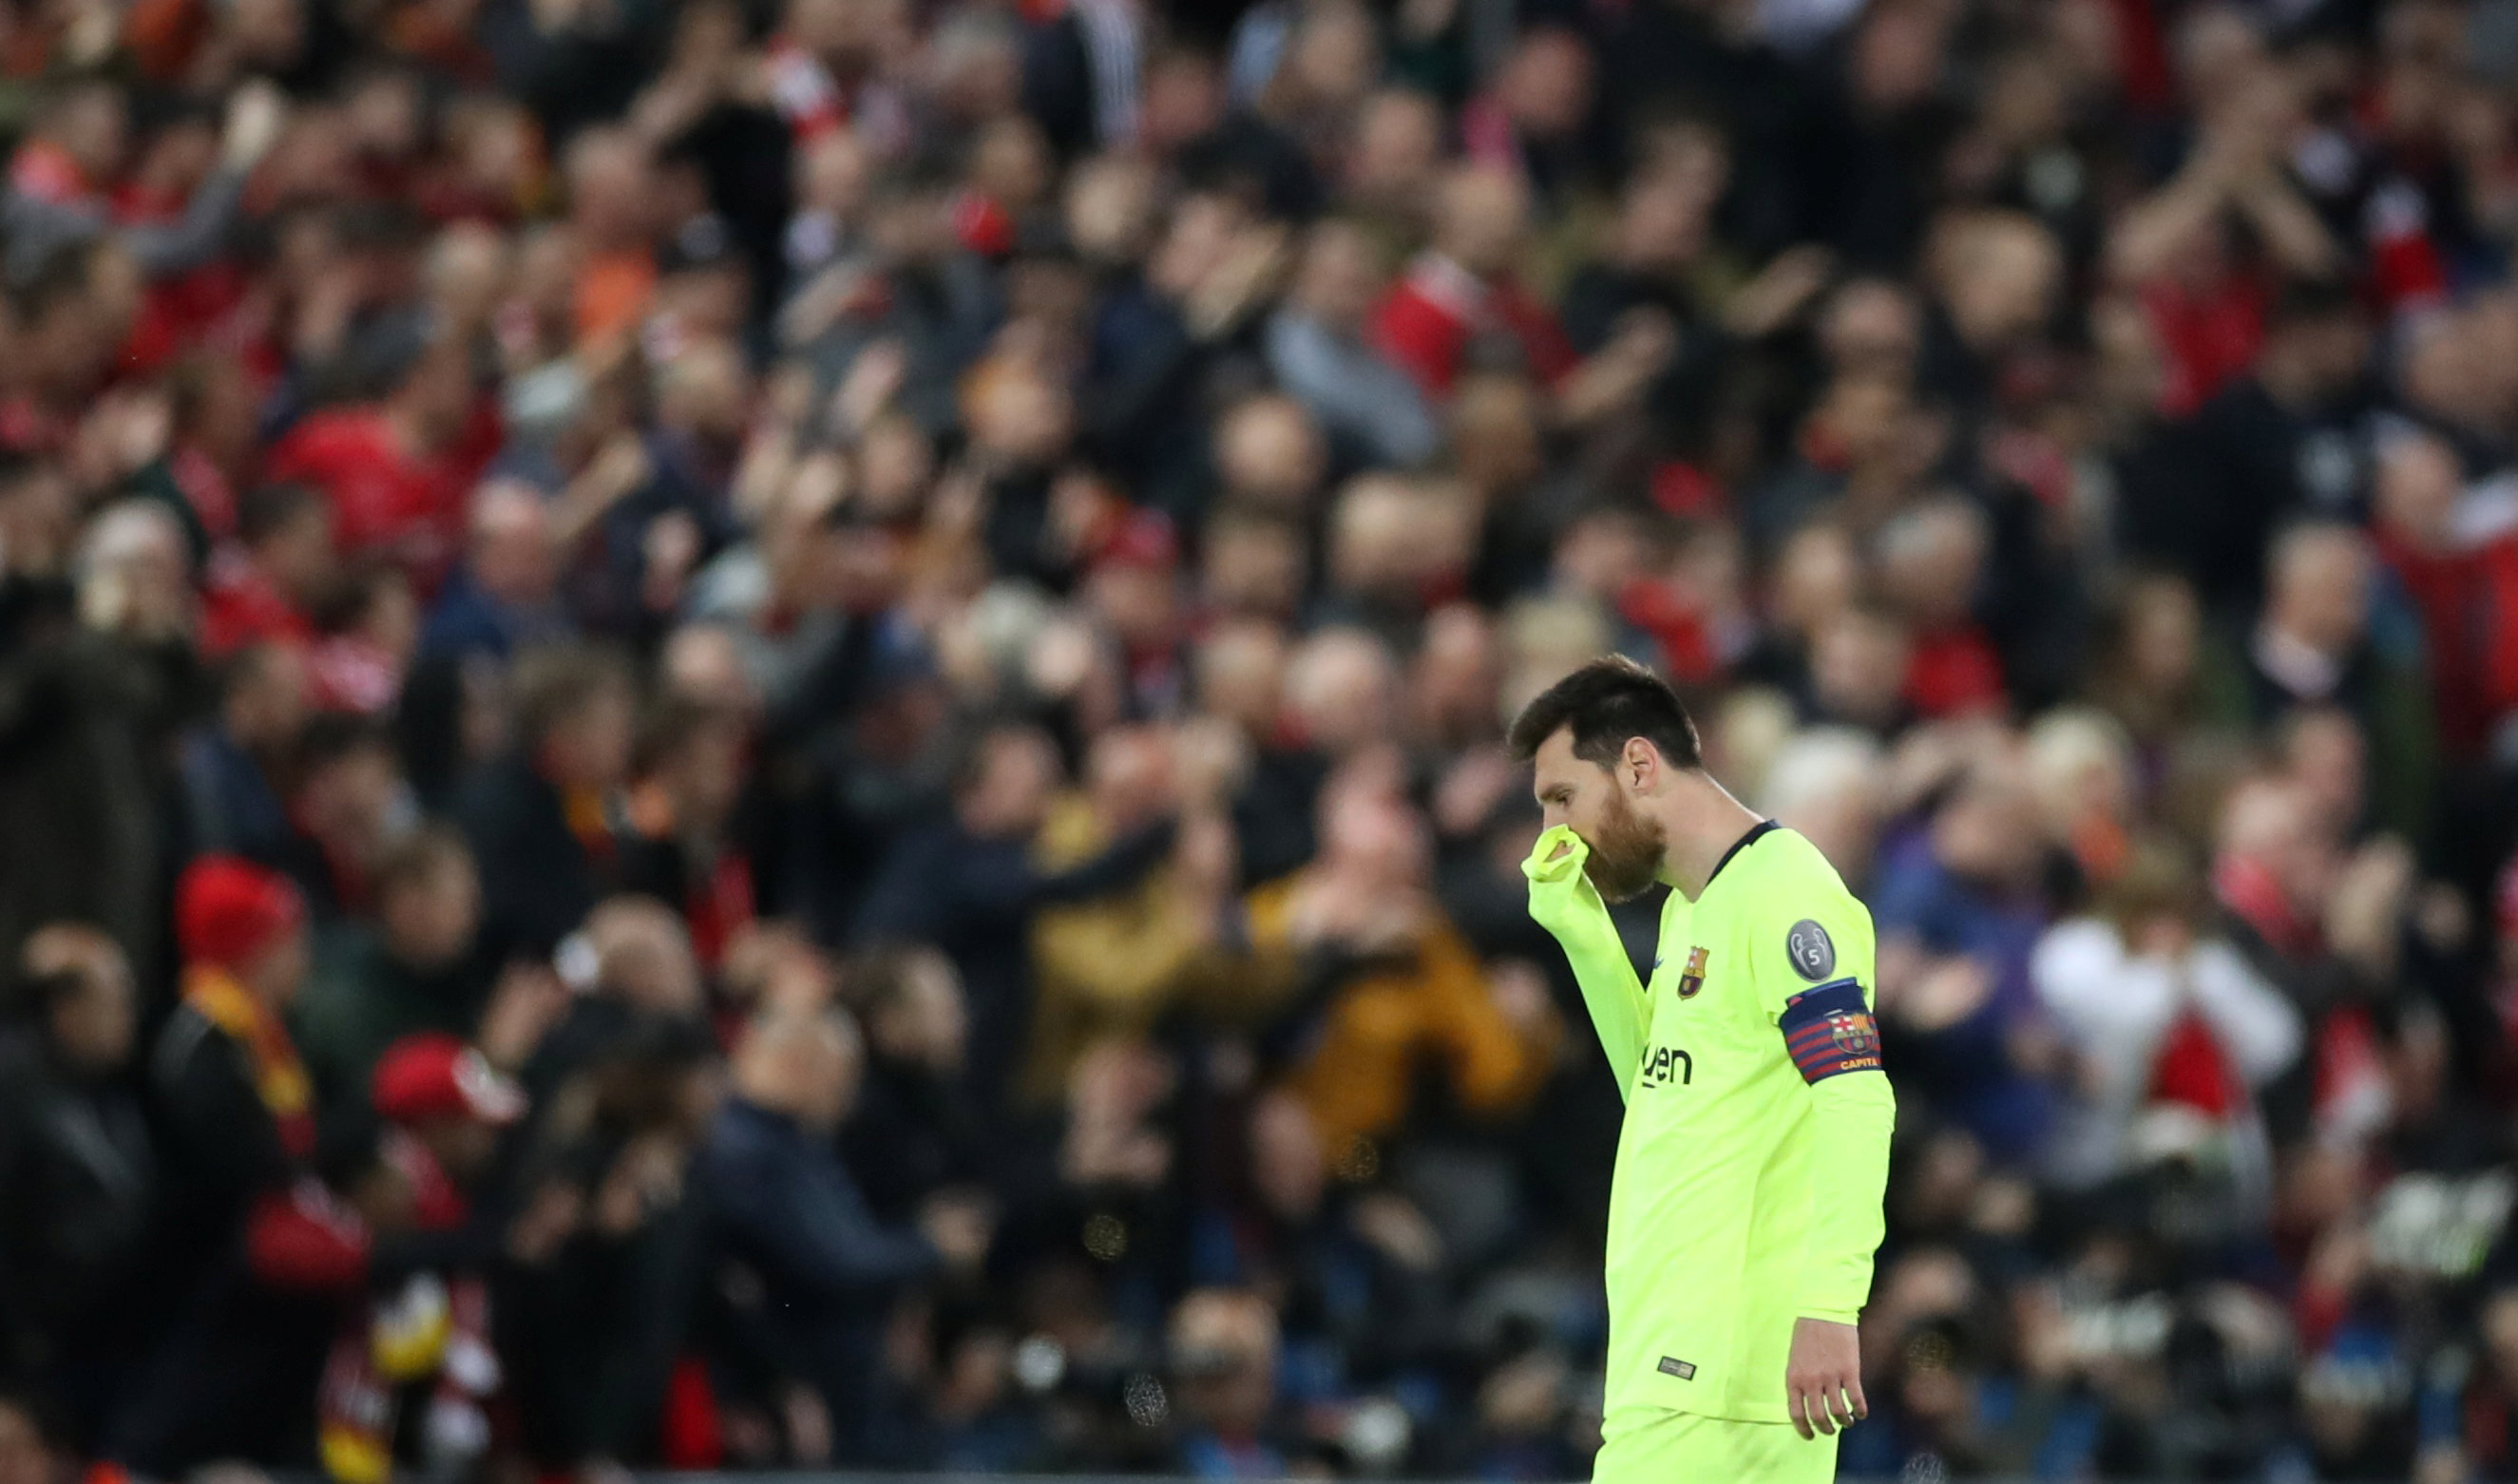 Leo Messi at Anfield Road coming to terms with the result of the match on May 7, 2019 (by Carl Recine/Reuters)